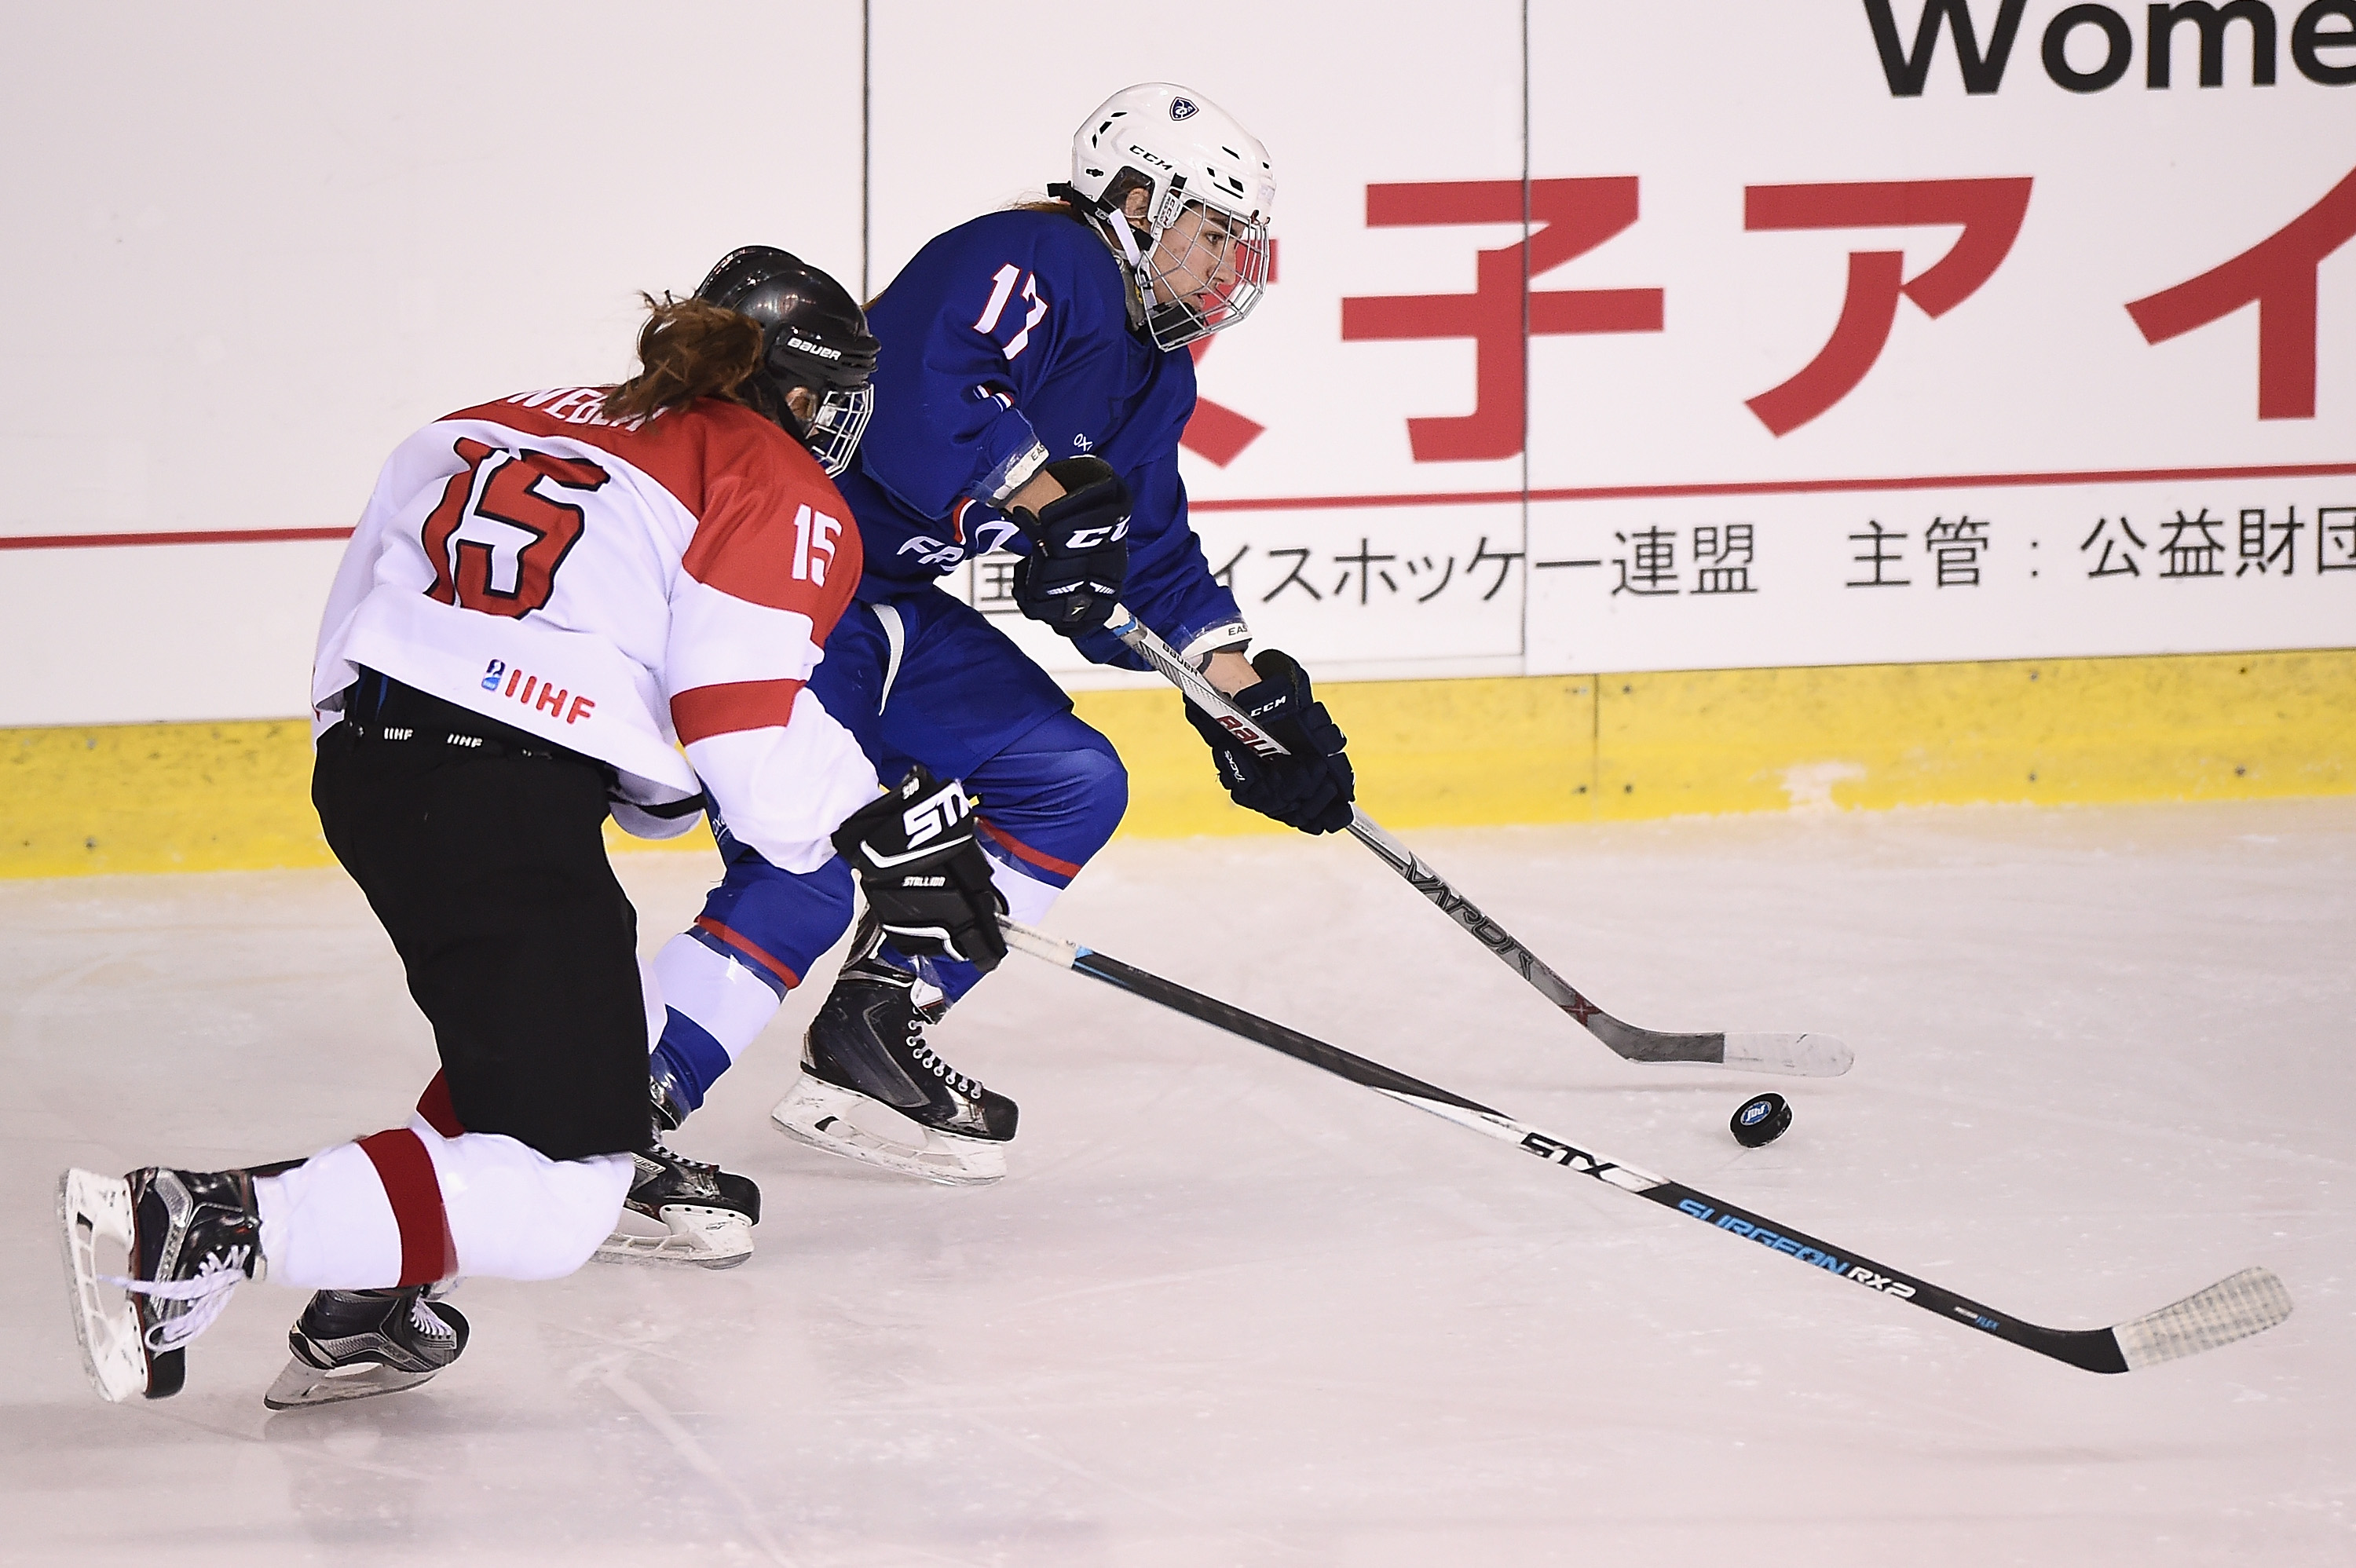 France v Austria - Women’s Ice Hockey Olympic Qualification Final - Group D